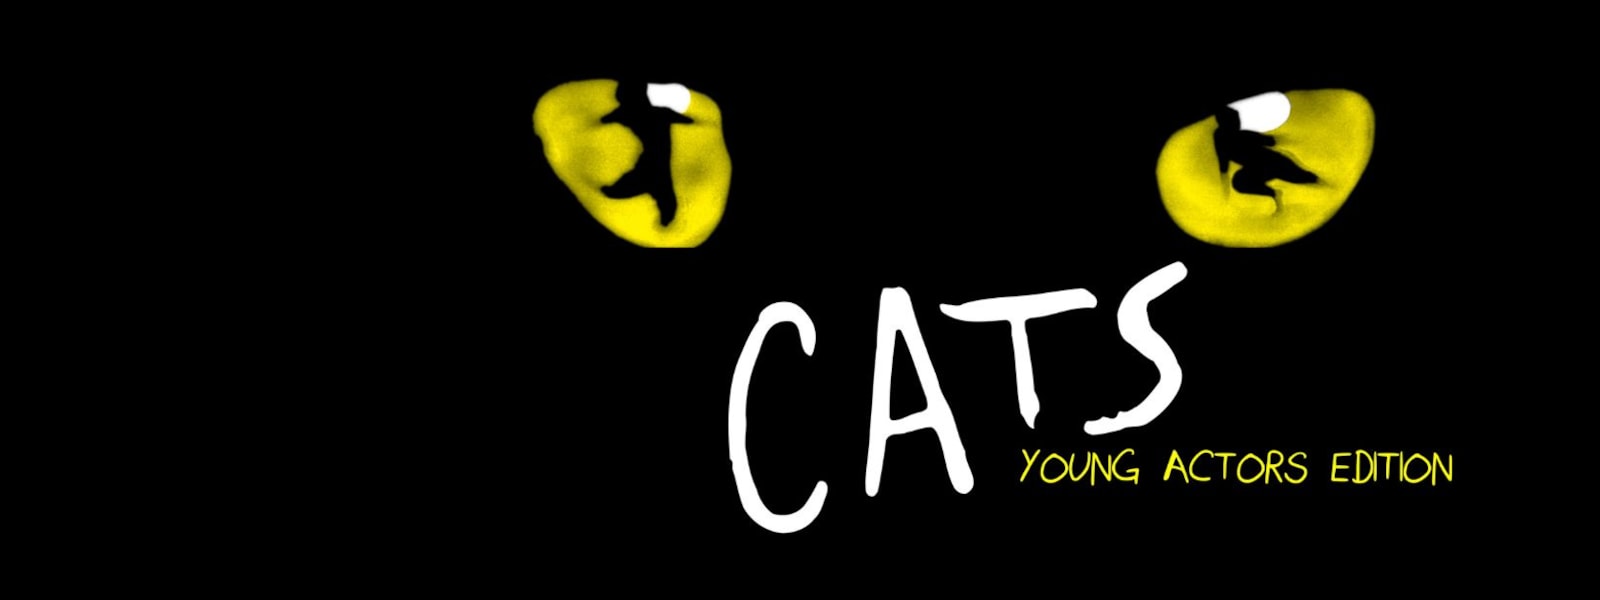 Cat eyes with words Cats, Young Actors Edition